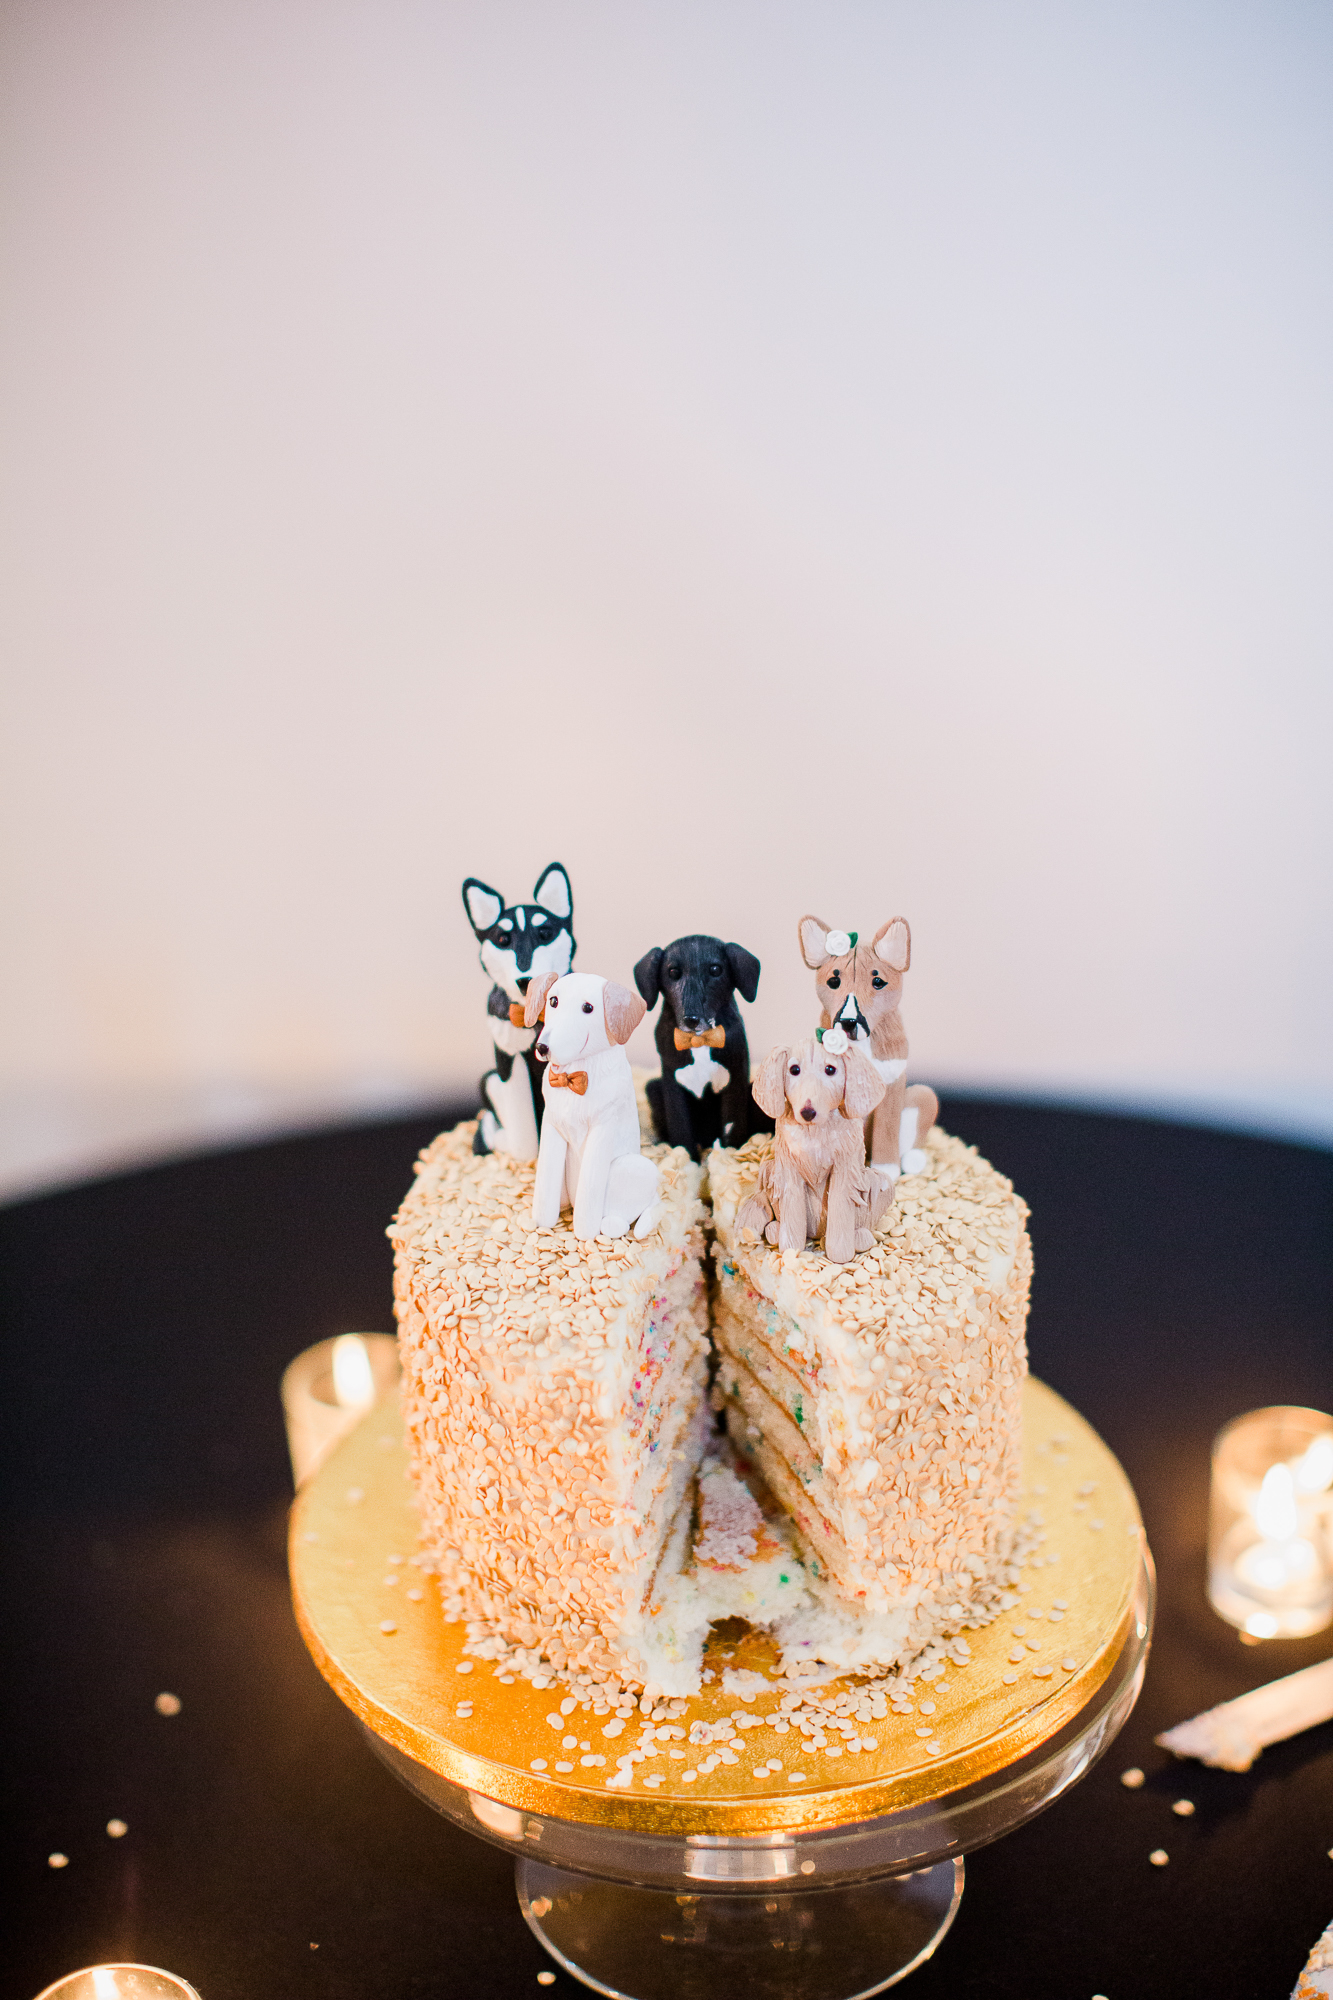 Small wedding cake design with custom cake toppers | Nashville Bride Guide